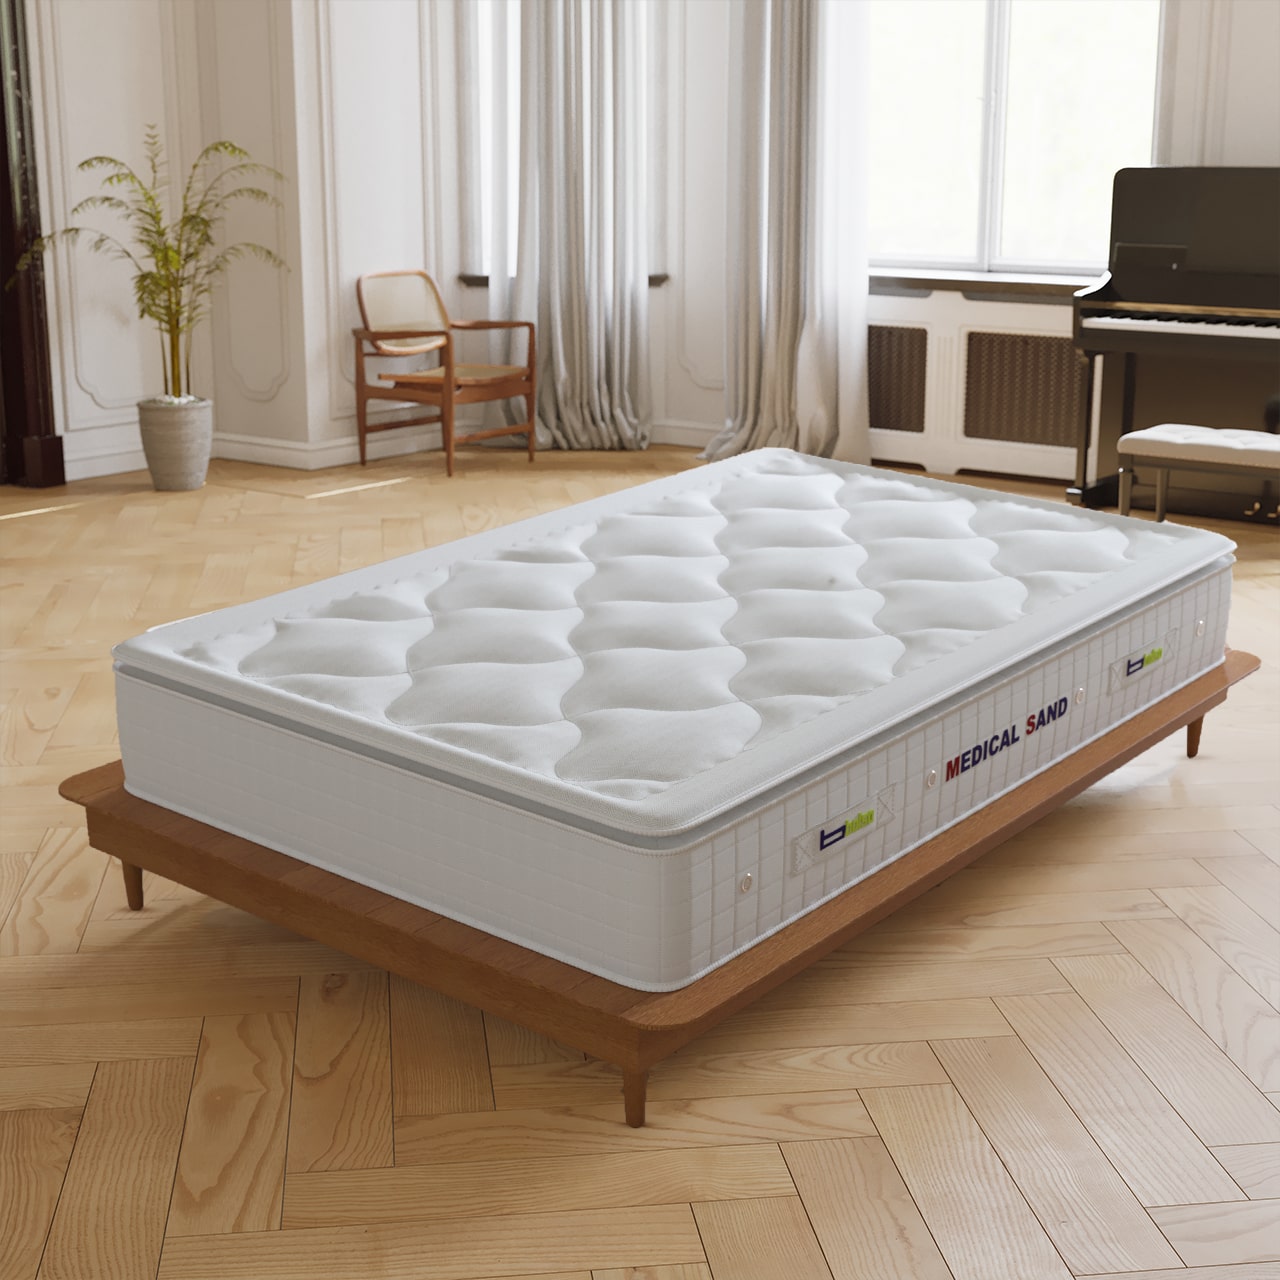 Deluxe single and double balsa medical mattress